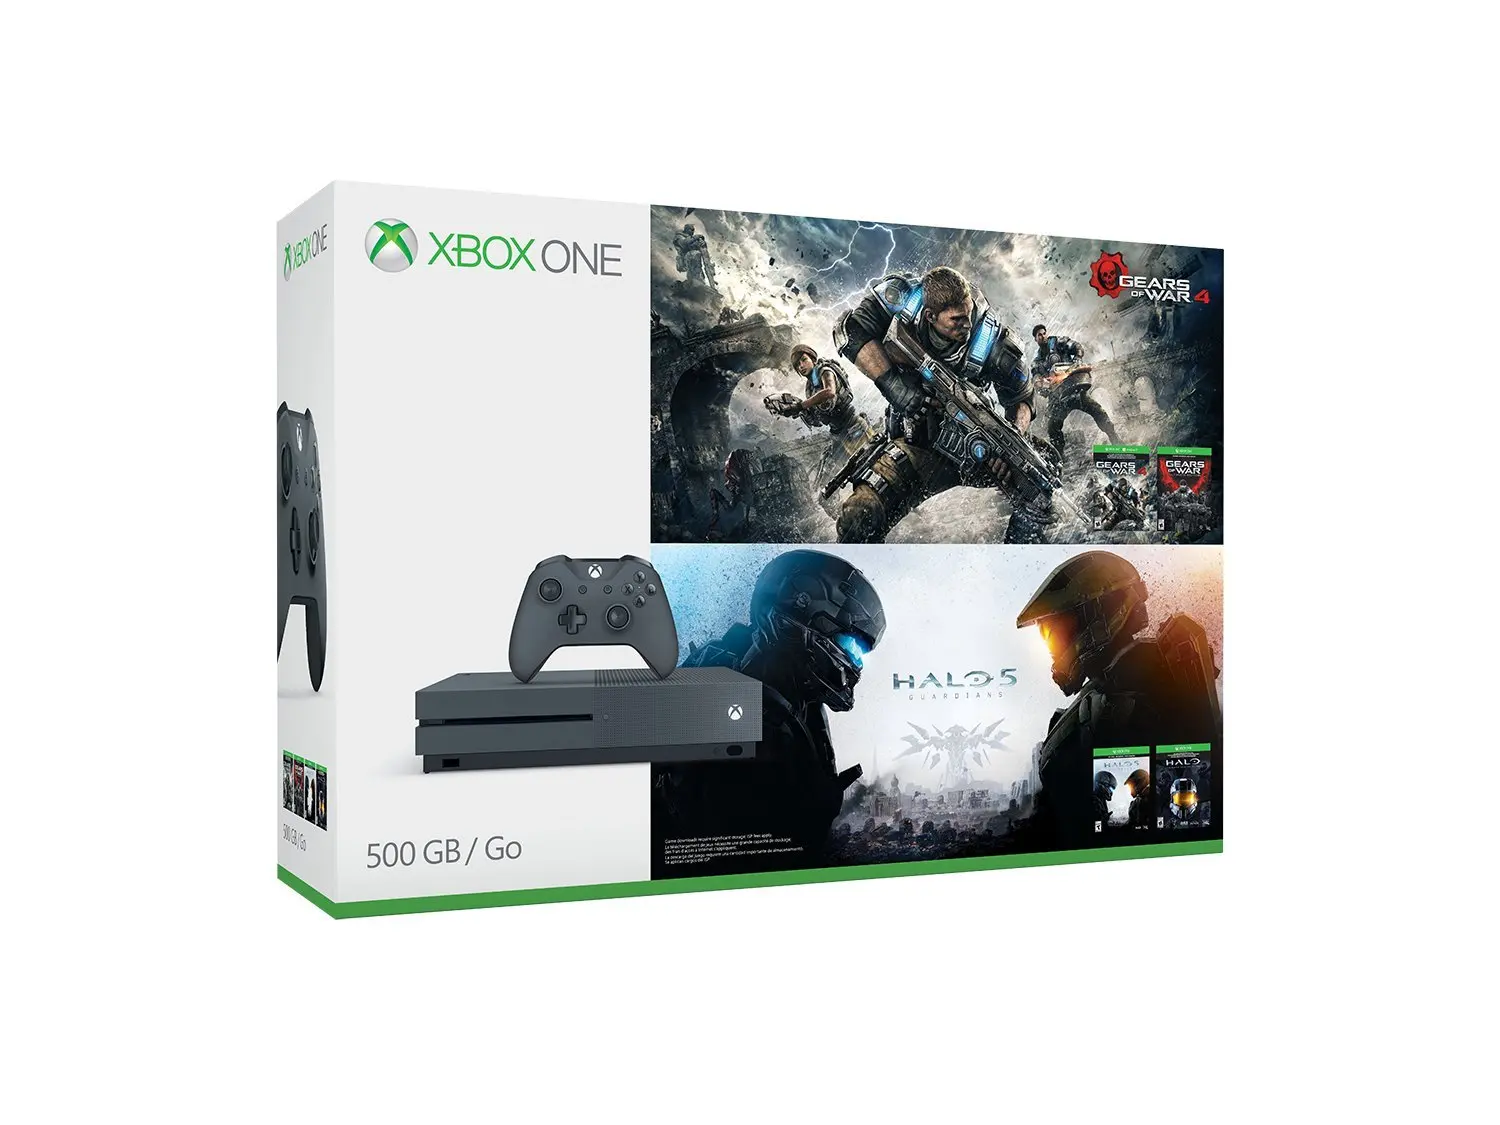 xbox one halo edition trade in value